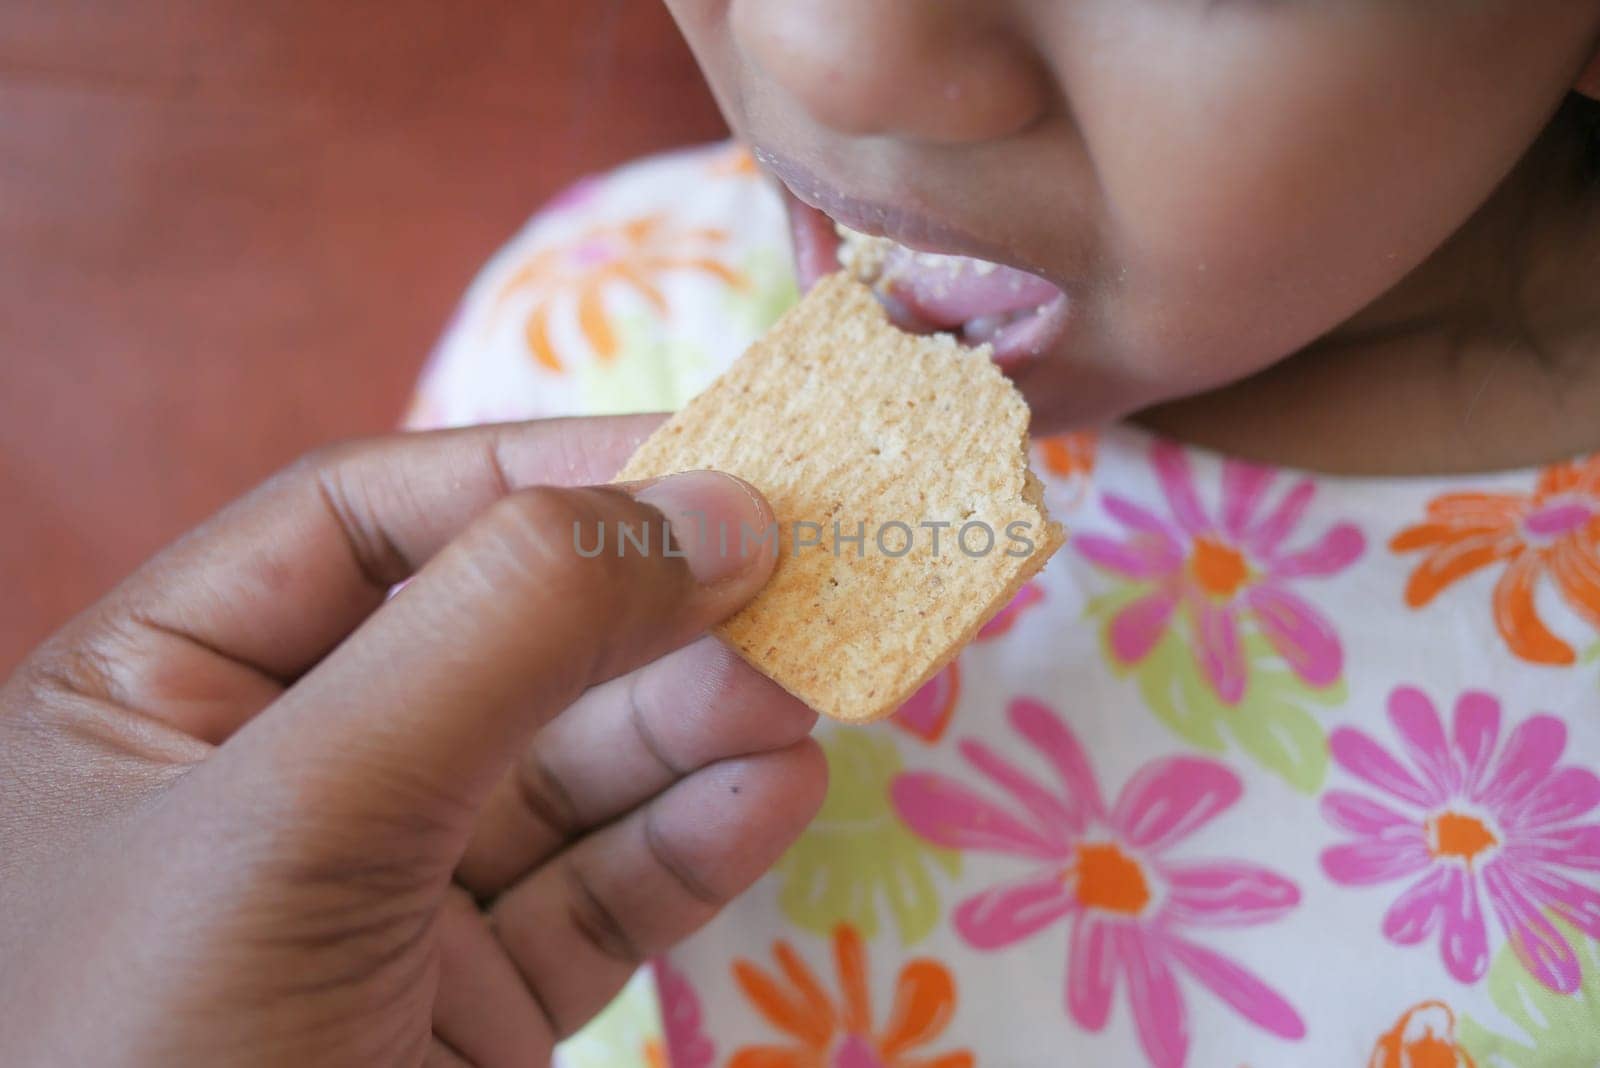 child mouth eating potato chips .